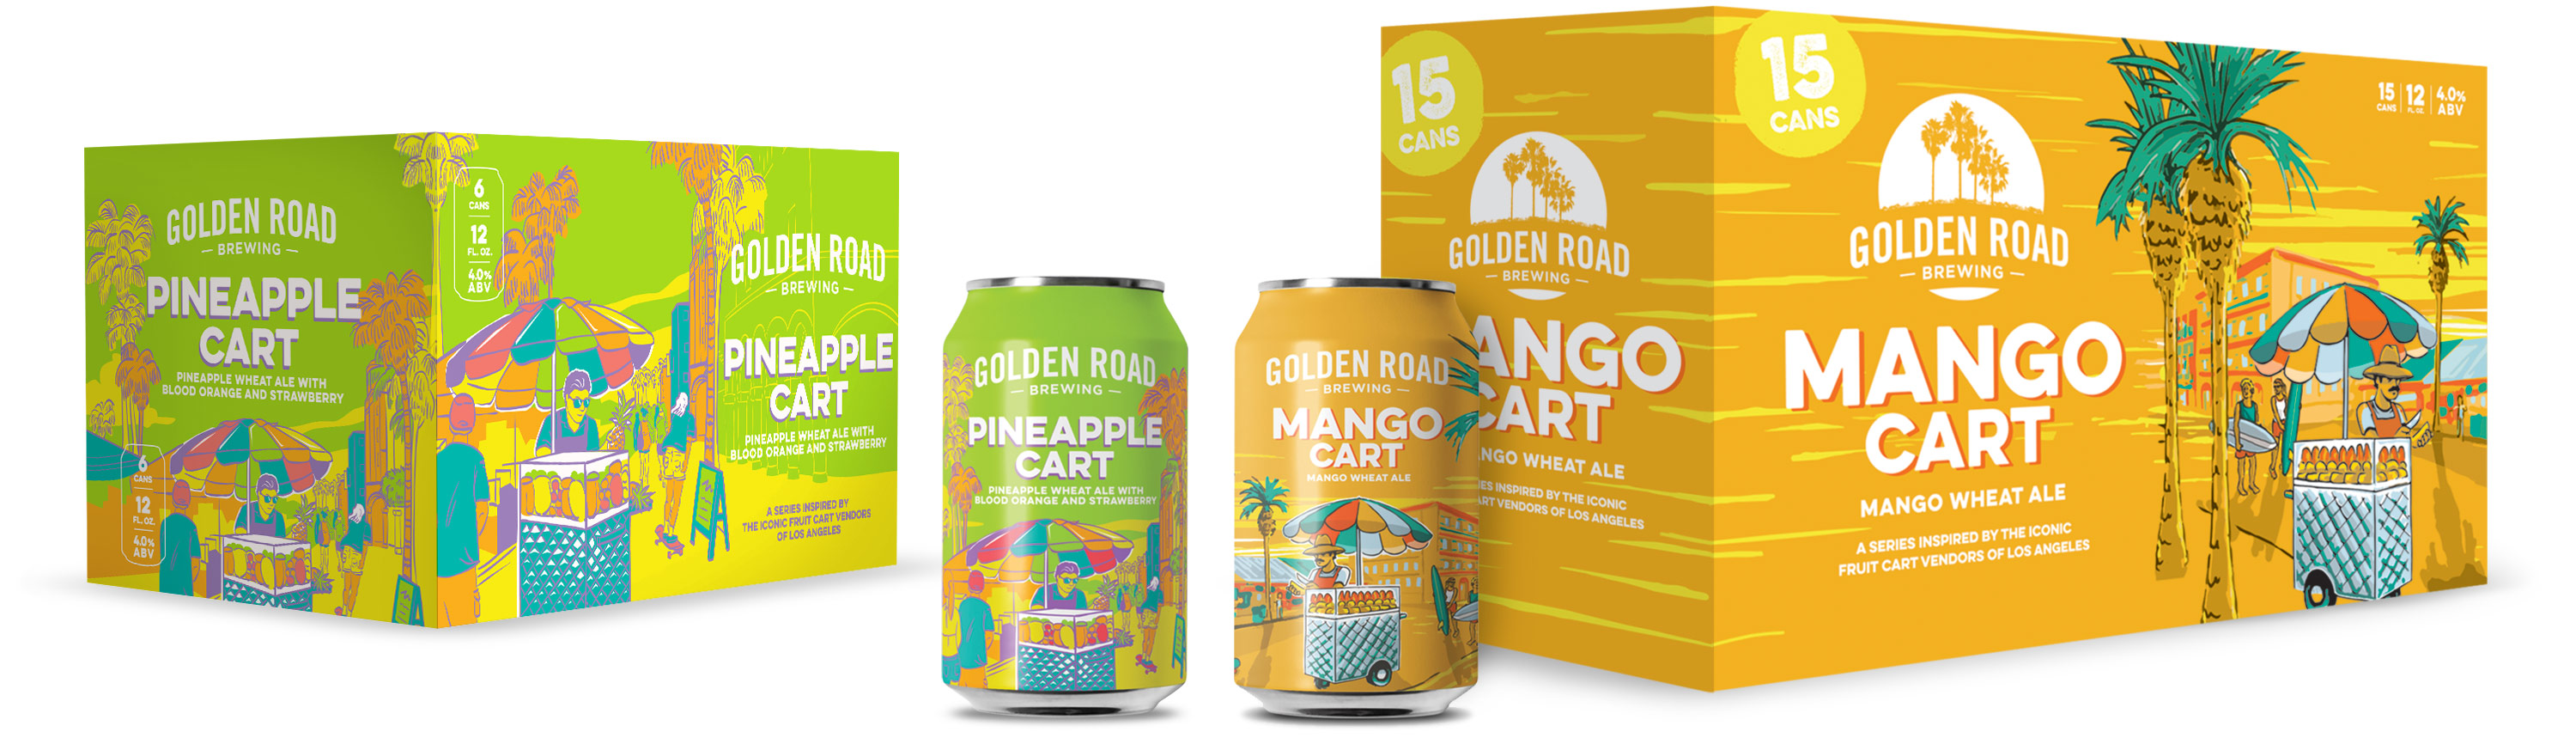 packaging design and Illustration for golden road brewing fruit cart series